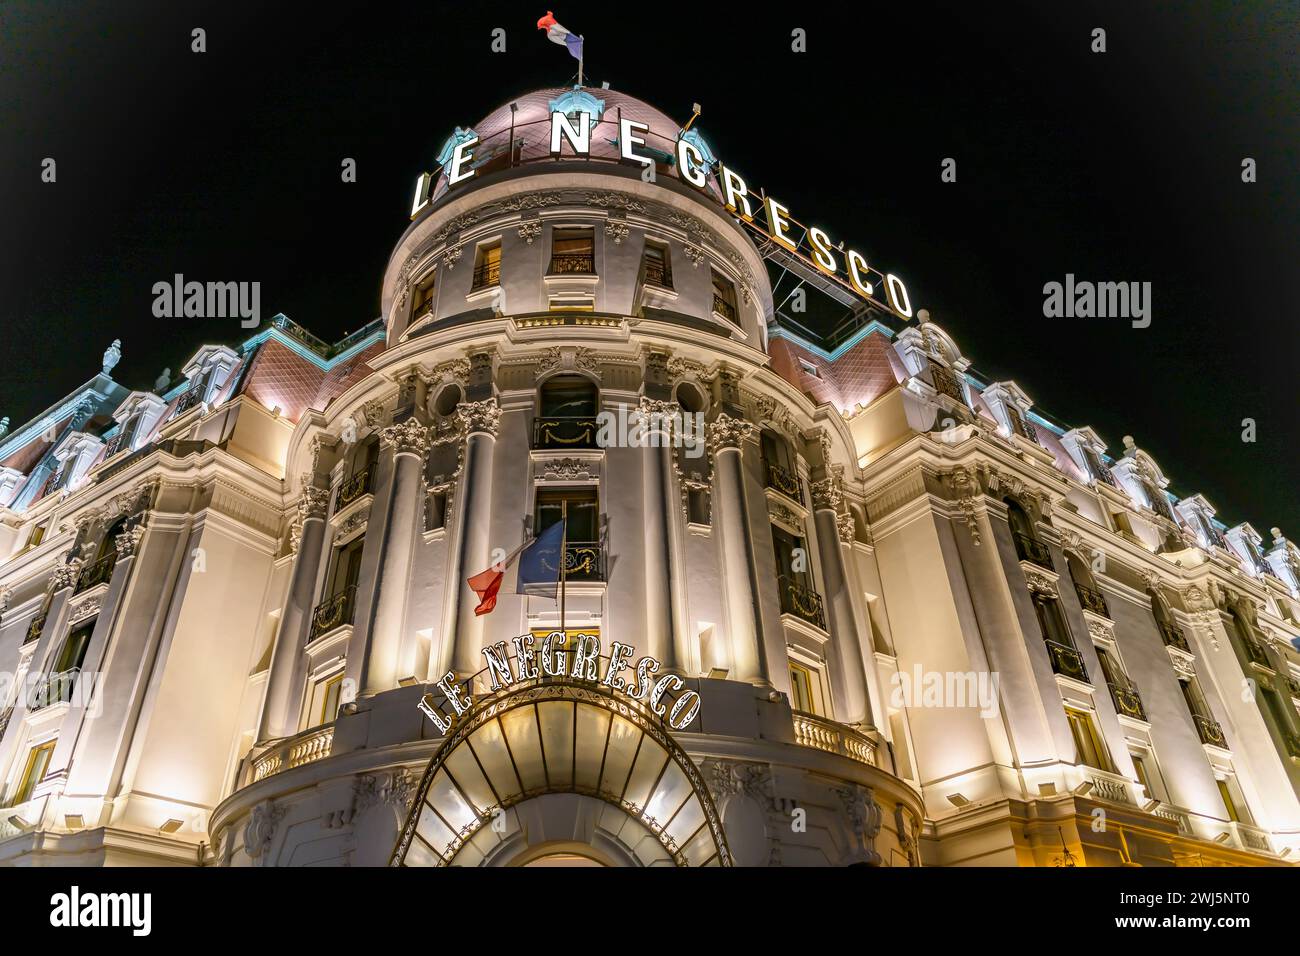 Nighttime shot of the iconic Le Negresco hotel and restaurant on the Promenade des Anglais, Nice on the Côte d'Azur, France. Stock Photo